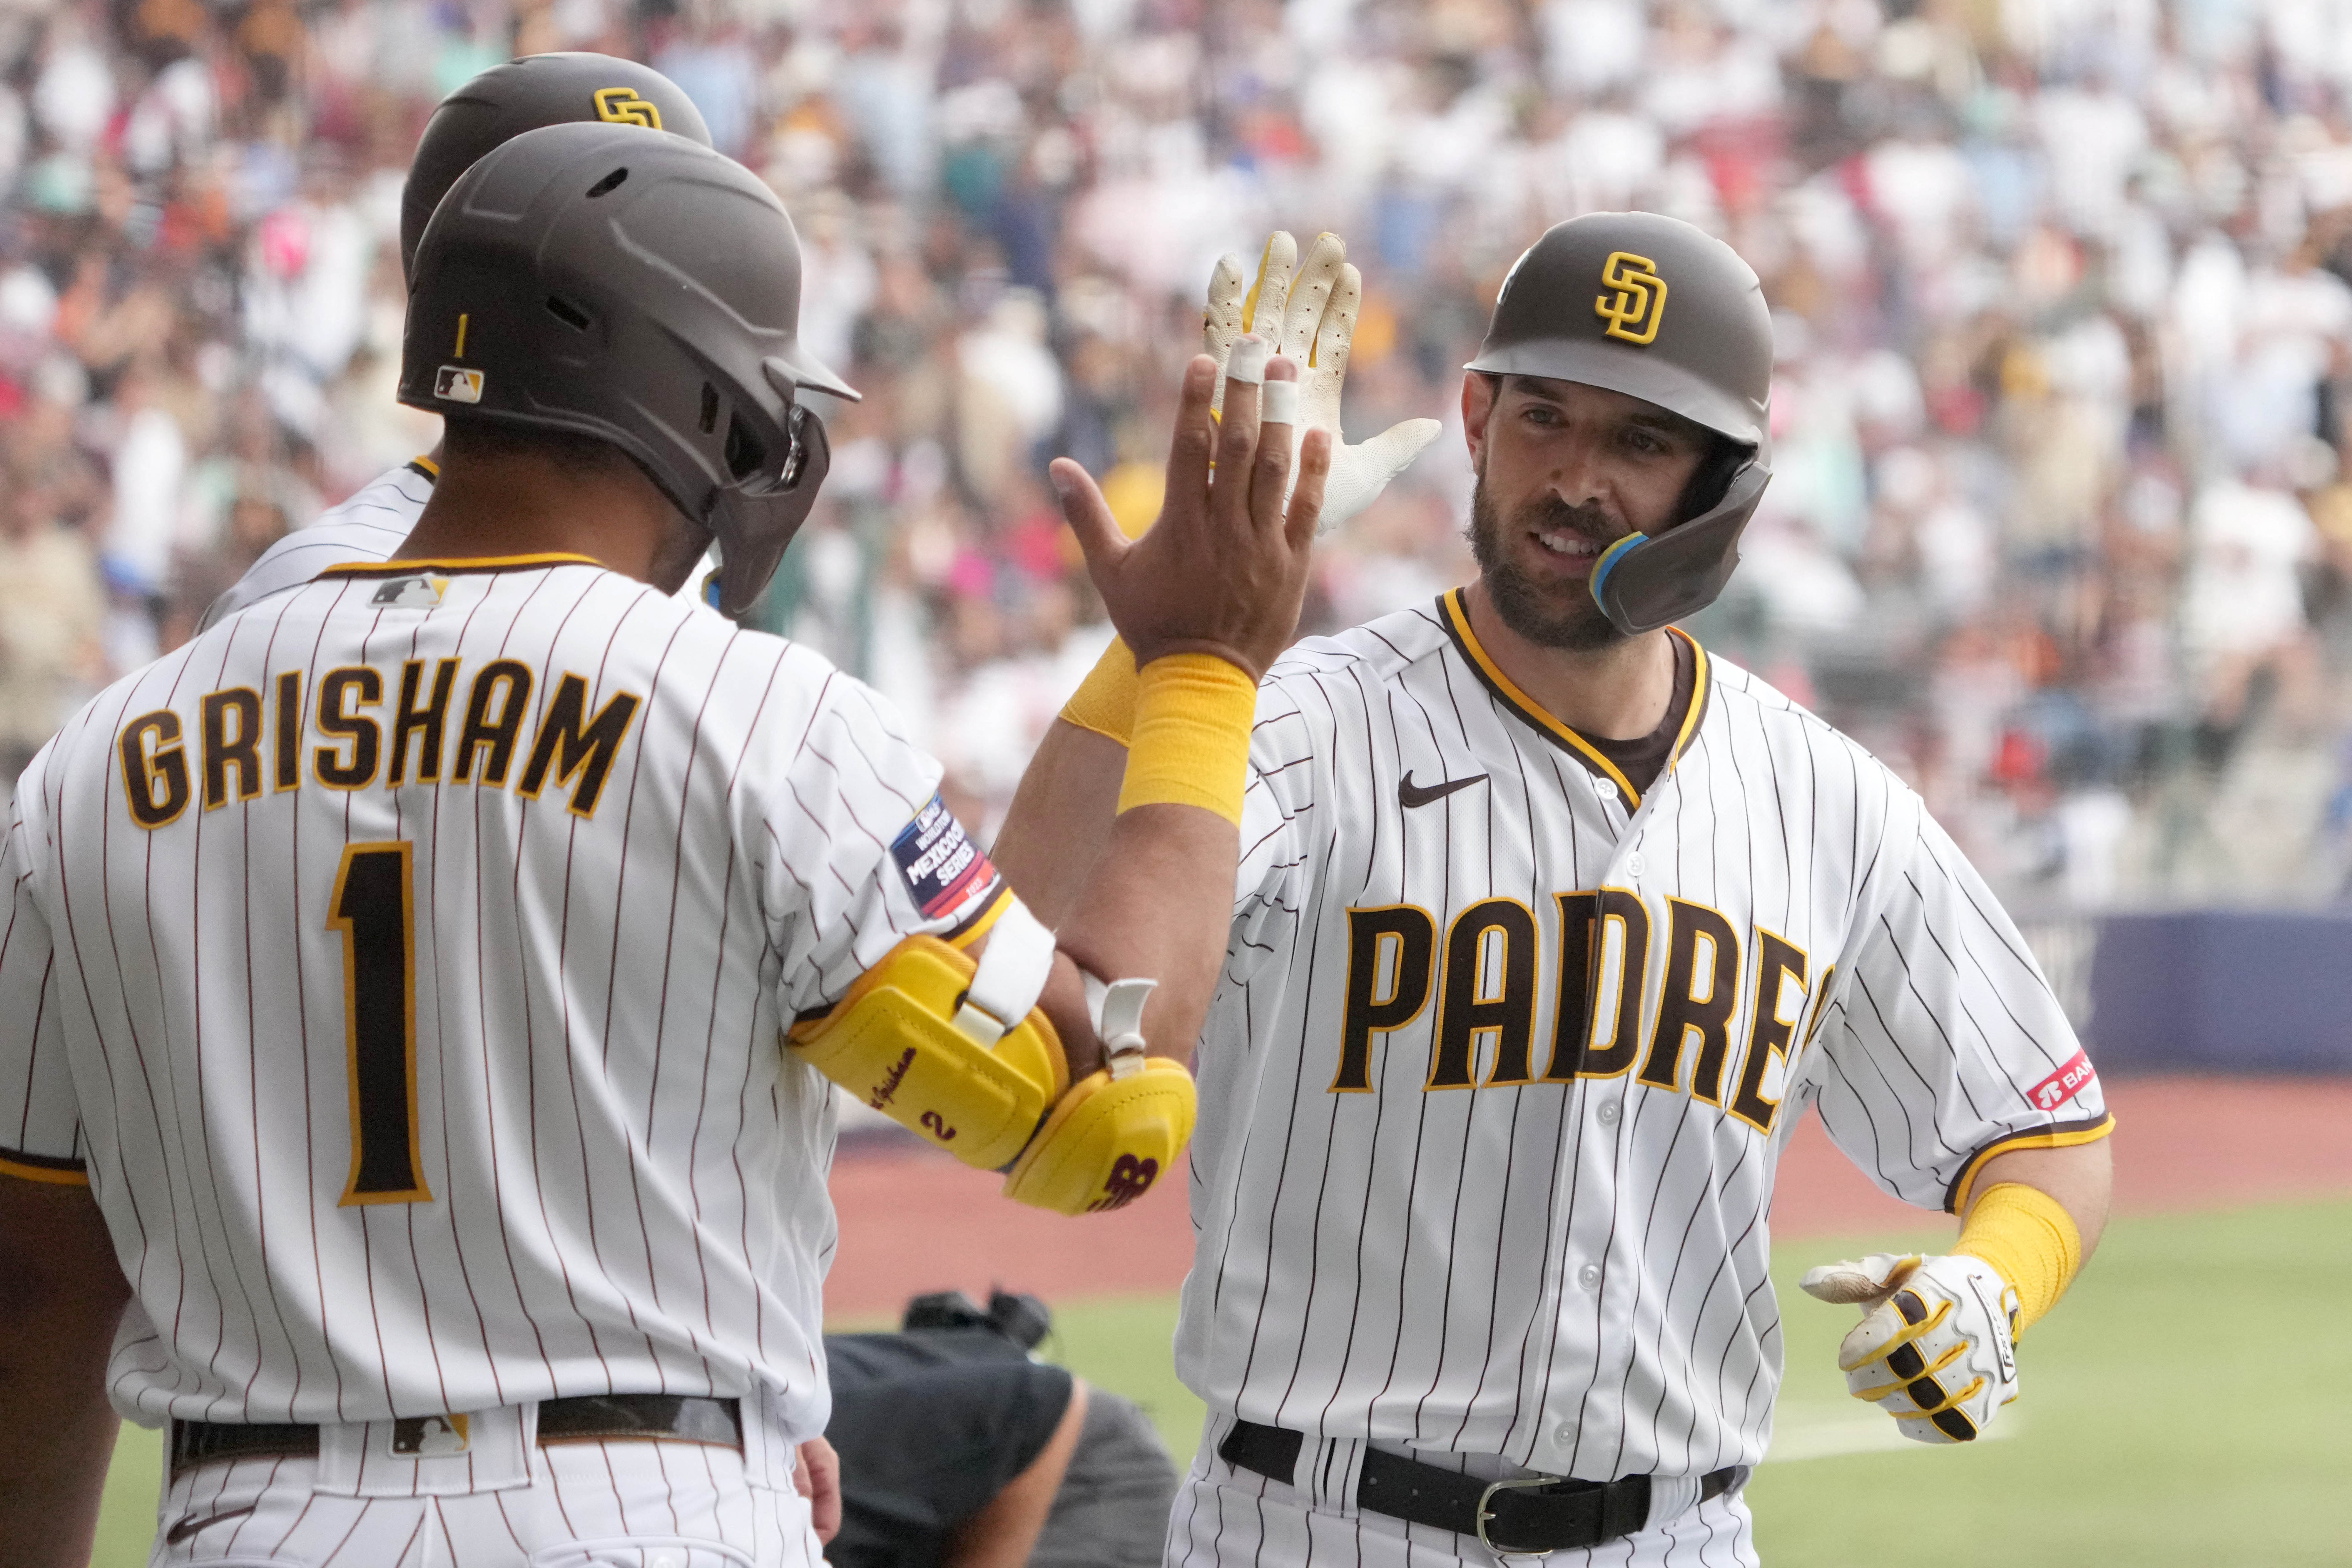 Padres Dominate Giants in MLB's Mexico City Series - The New York